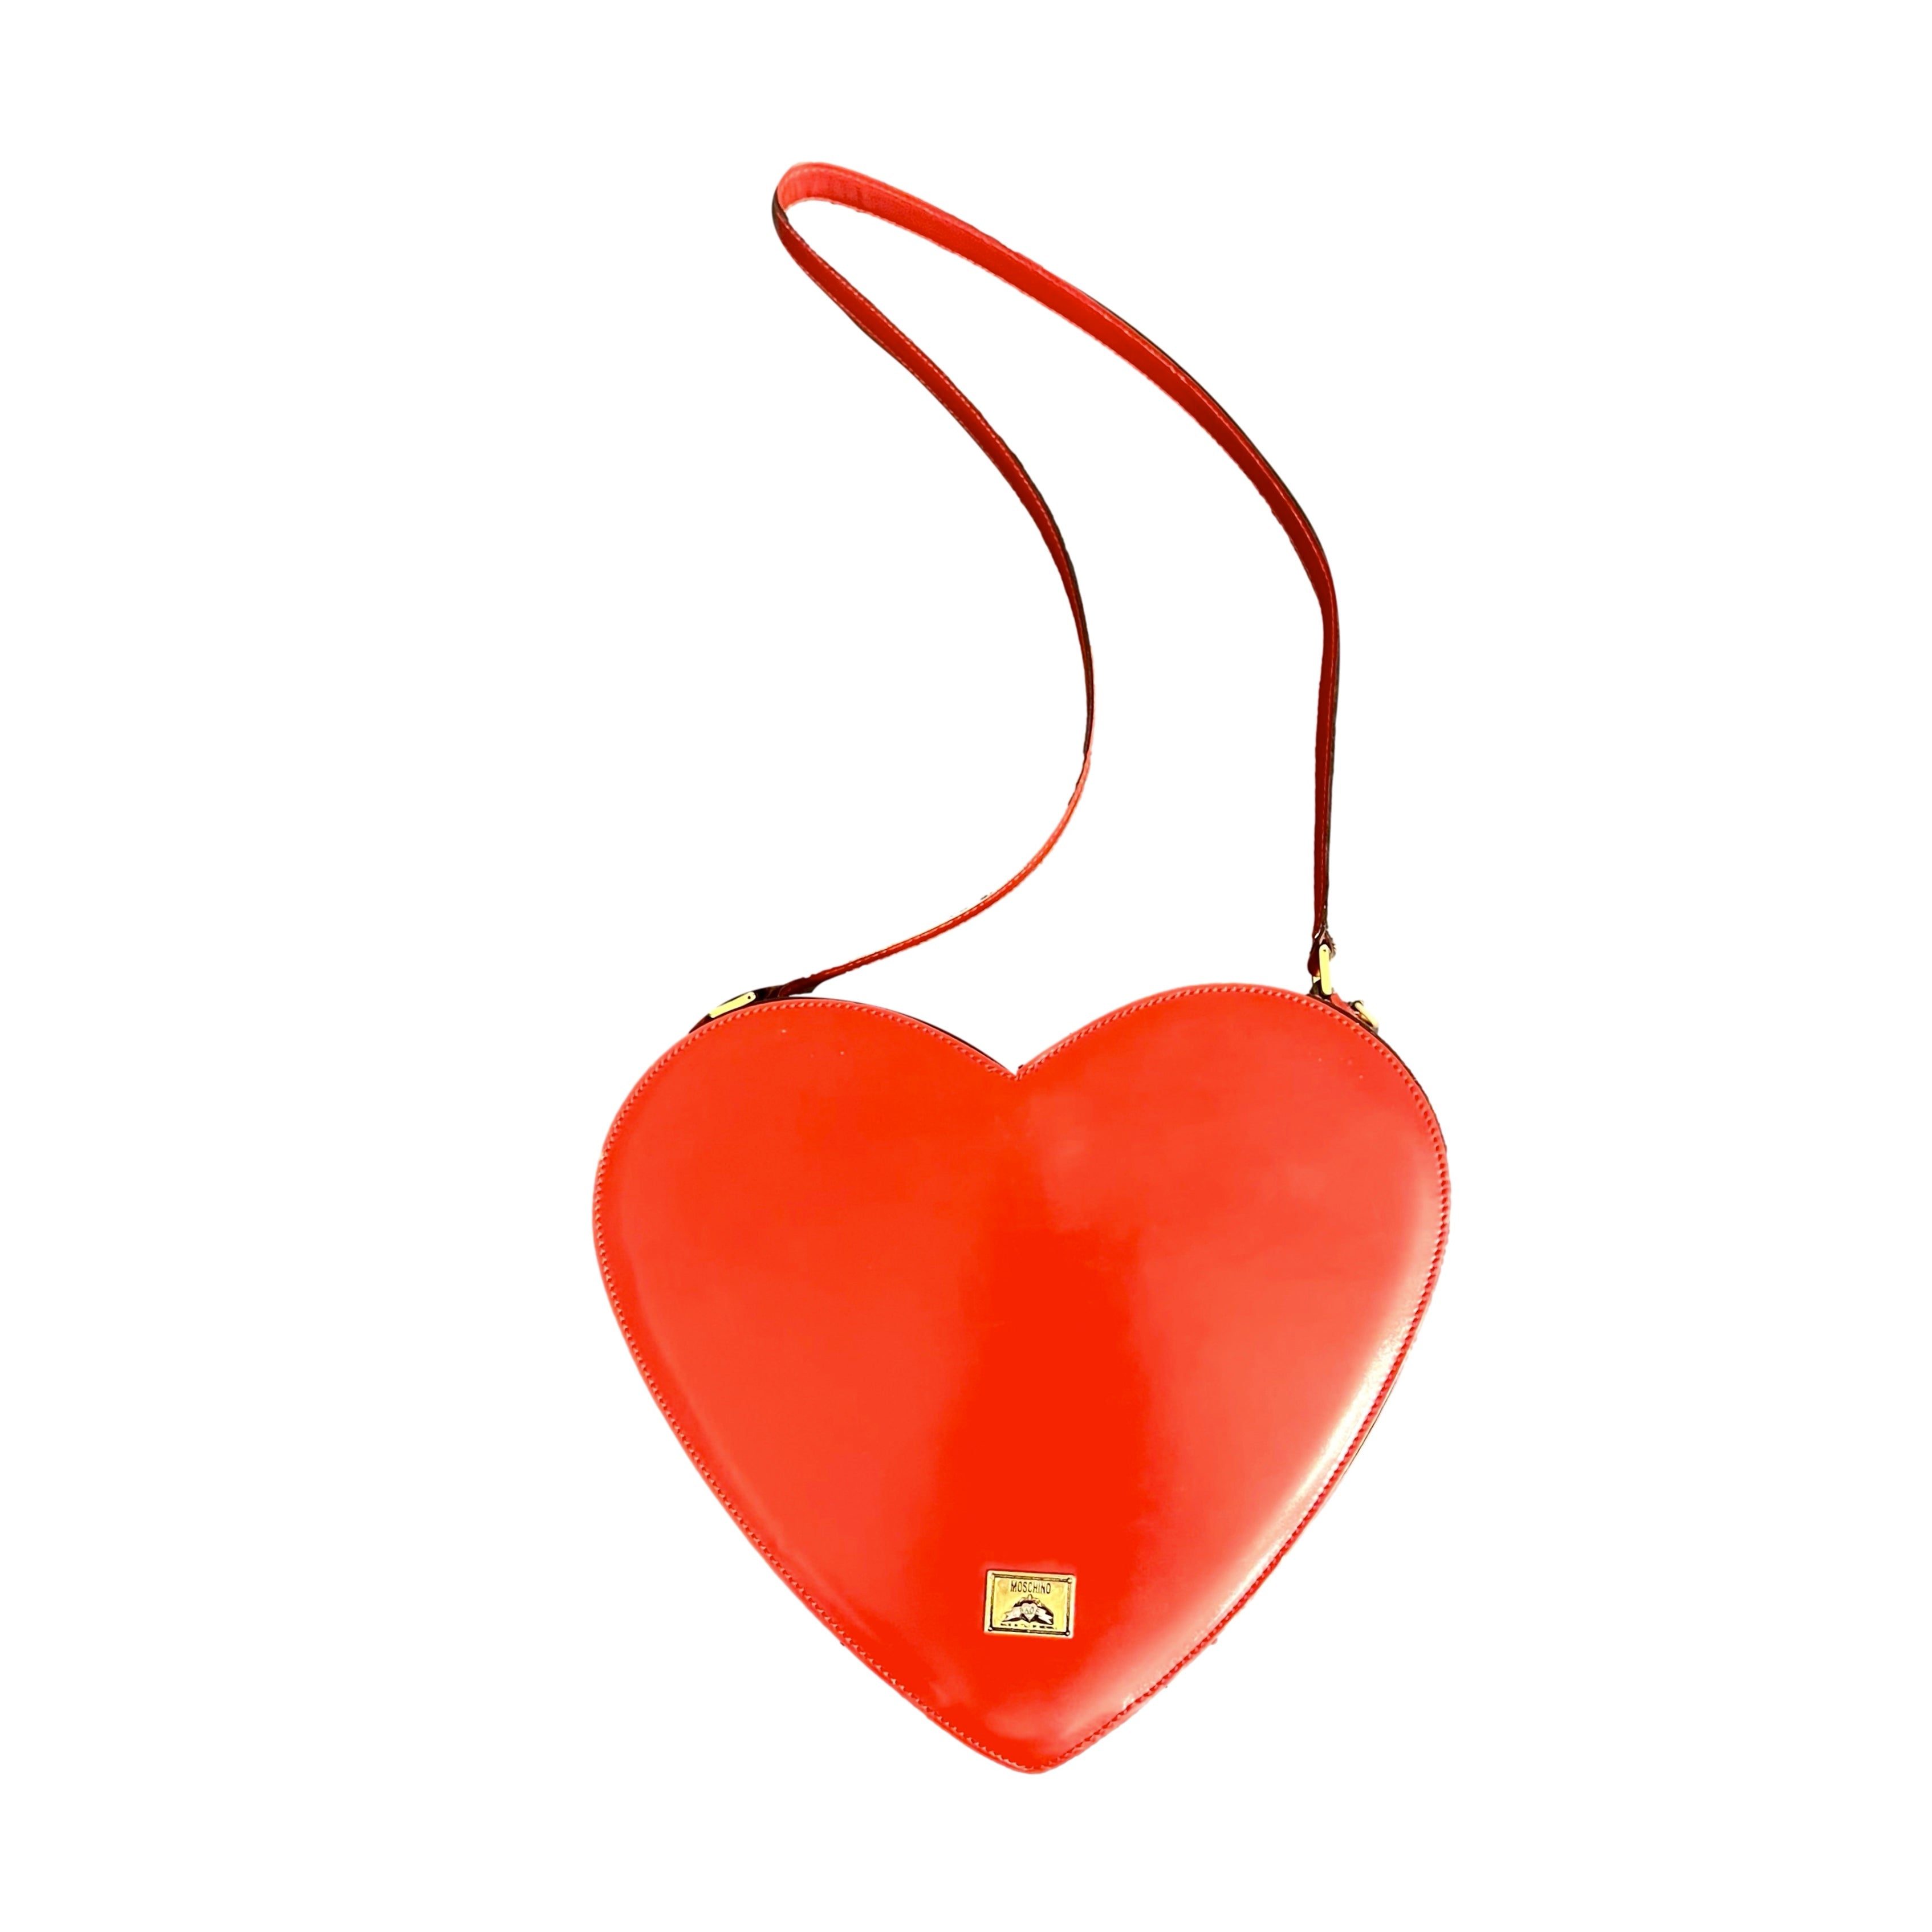 Molded Heart Bag in Retro Red